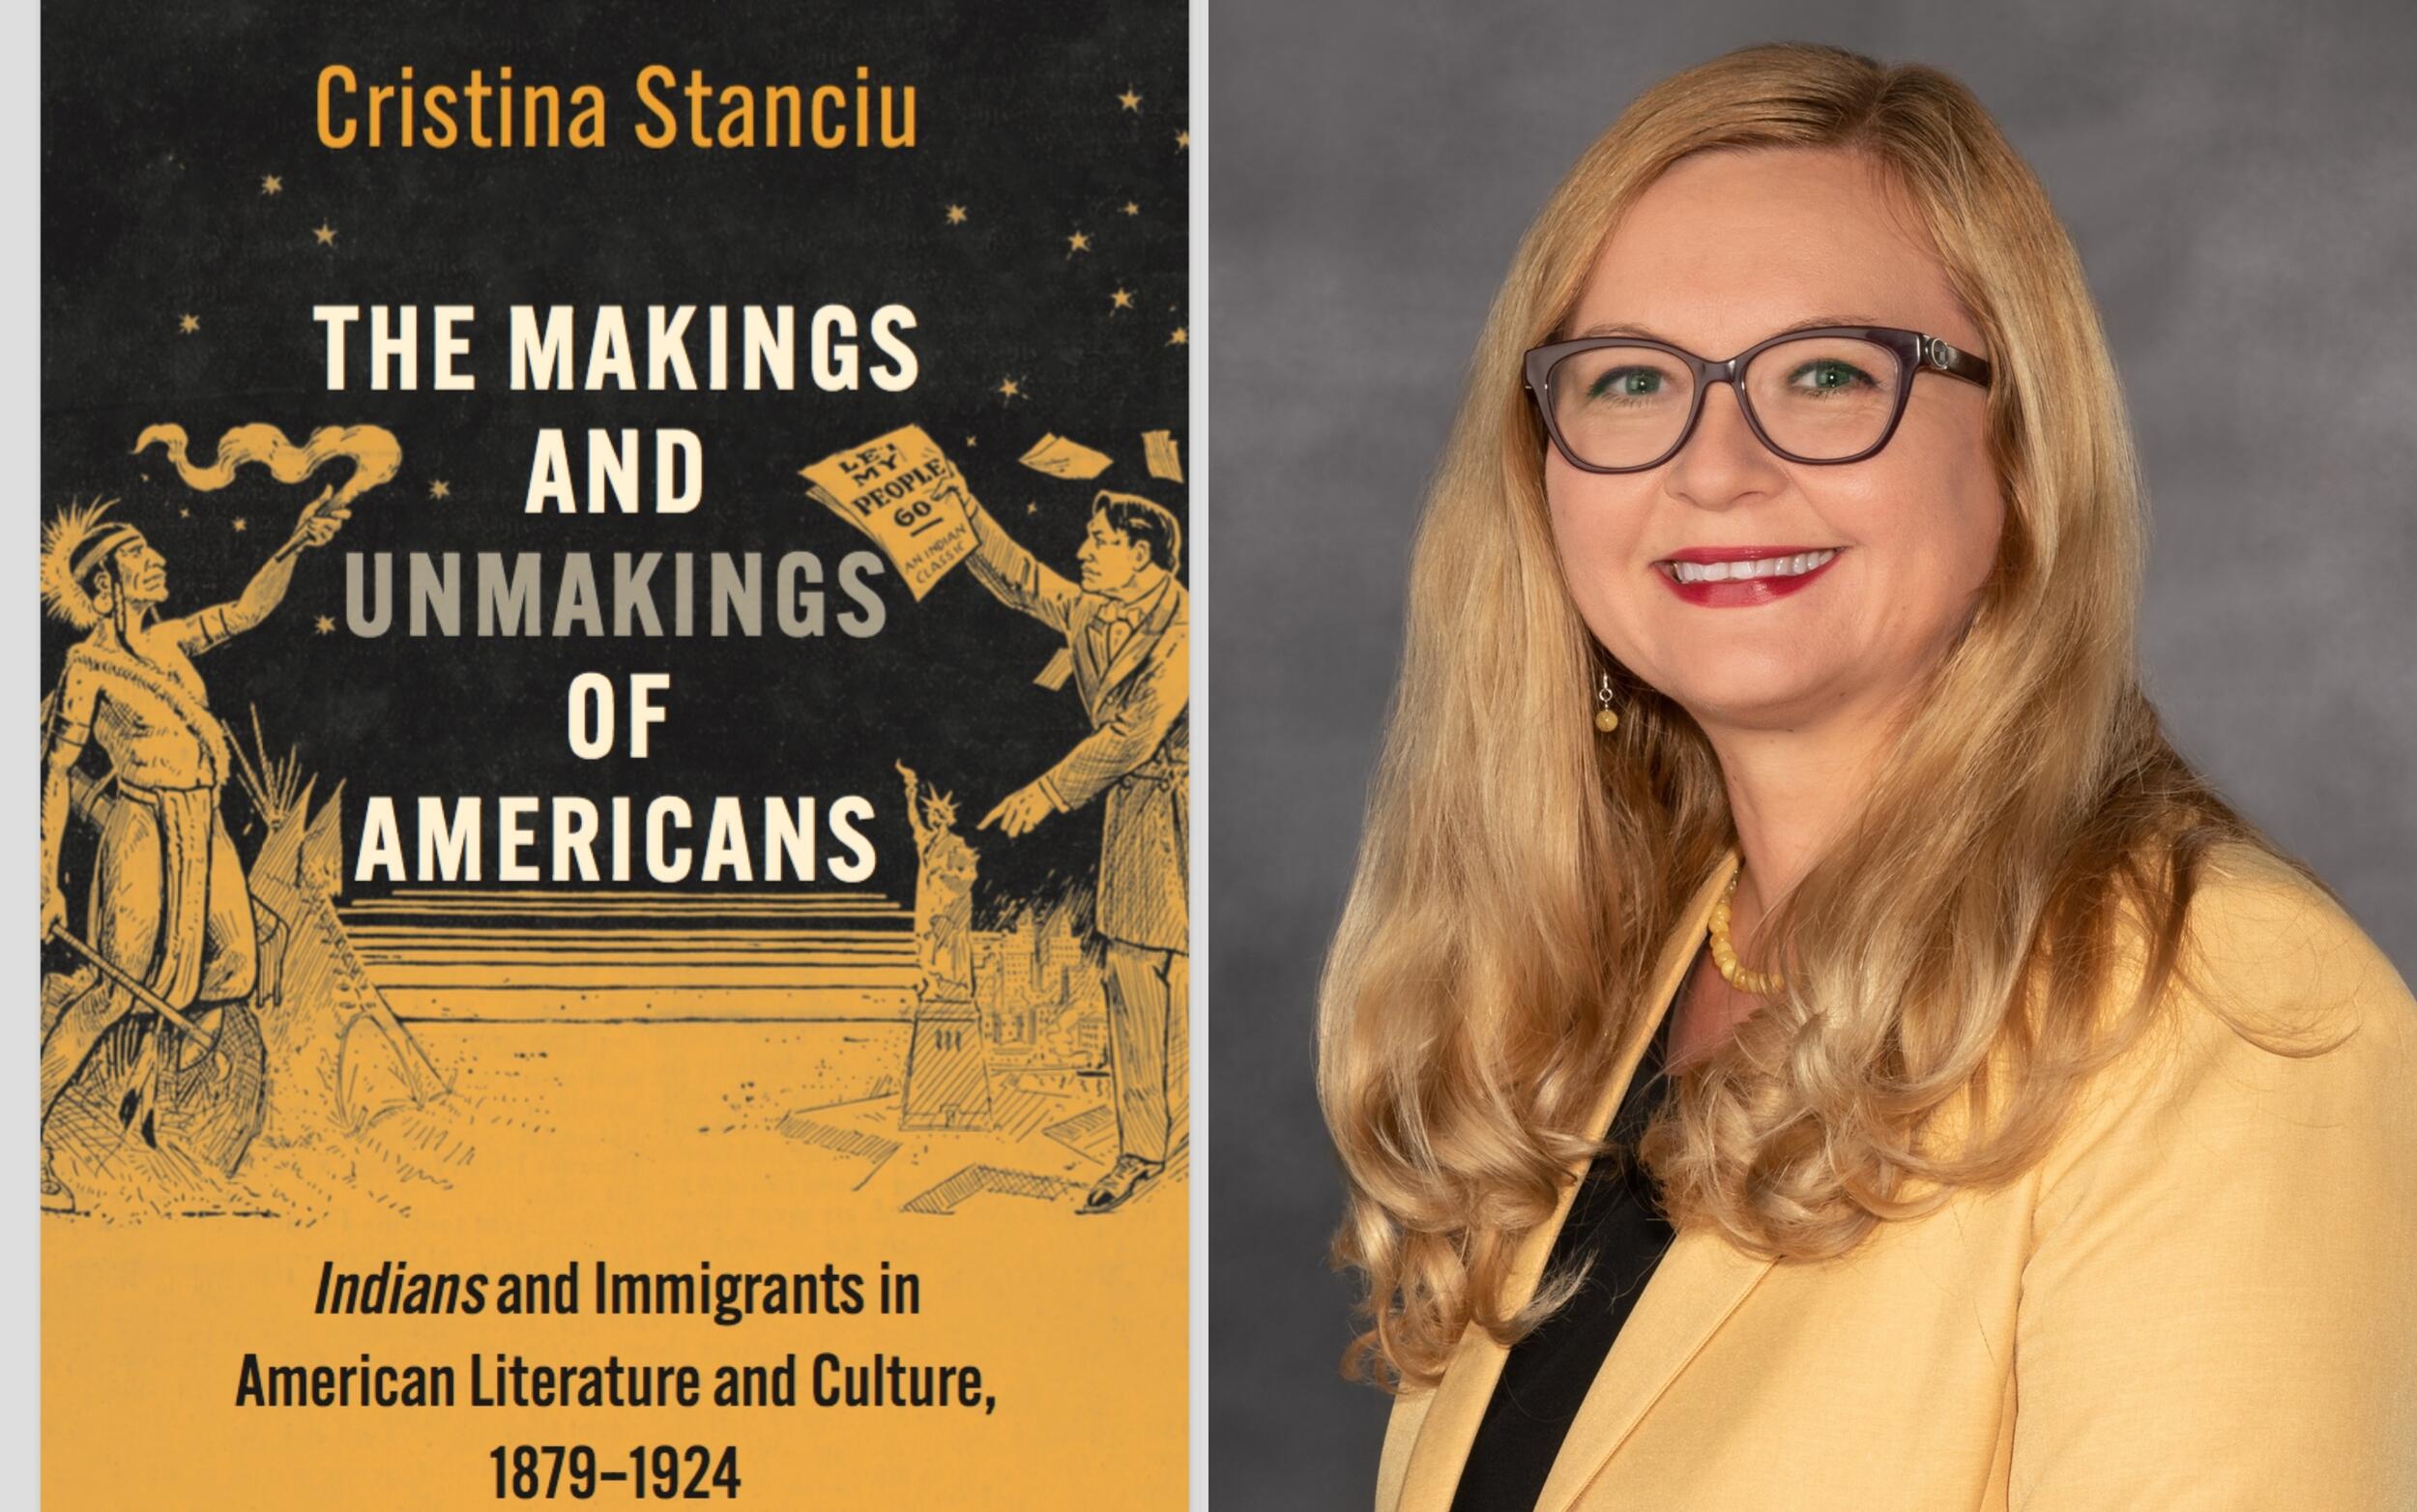 On this left is a photo of a blonde woman smiling. She is wearing black glasses, a yellow sports coat, and a black blouse. On the right is a book cover with an illustration of a native american holding up a torch on the left and a white man holding up a paper on the right. The text on the book reads \"Christina Stanciu THE MAKINGS AND UNMAKINGS OF AMERICAS Indians and Immigrants in American Literature, 1879-1924\"